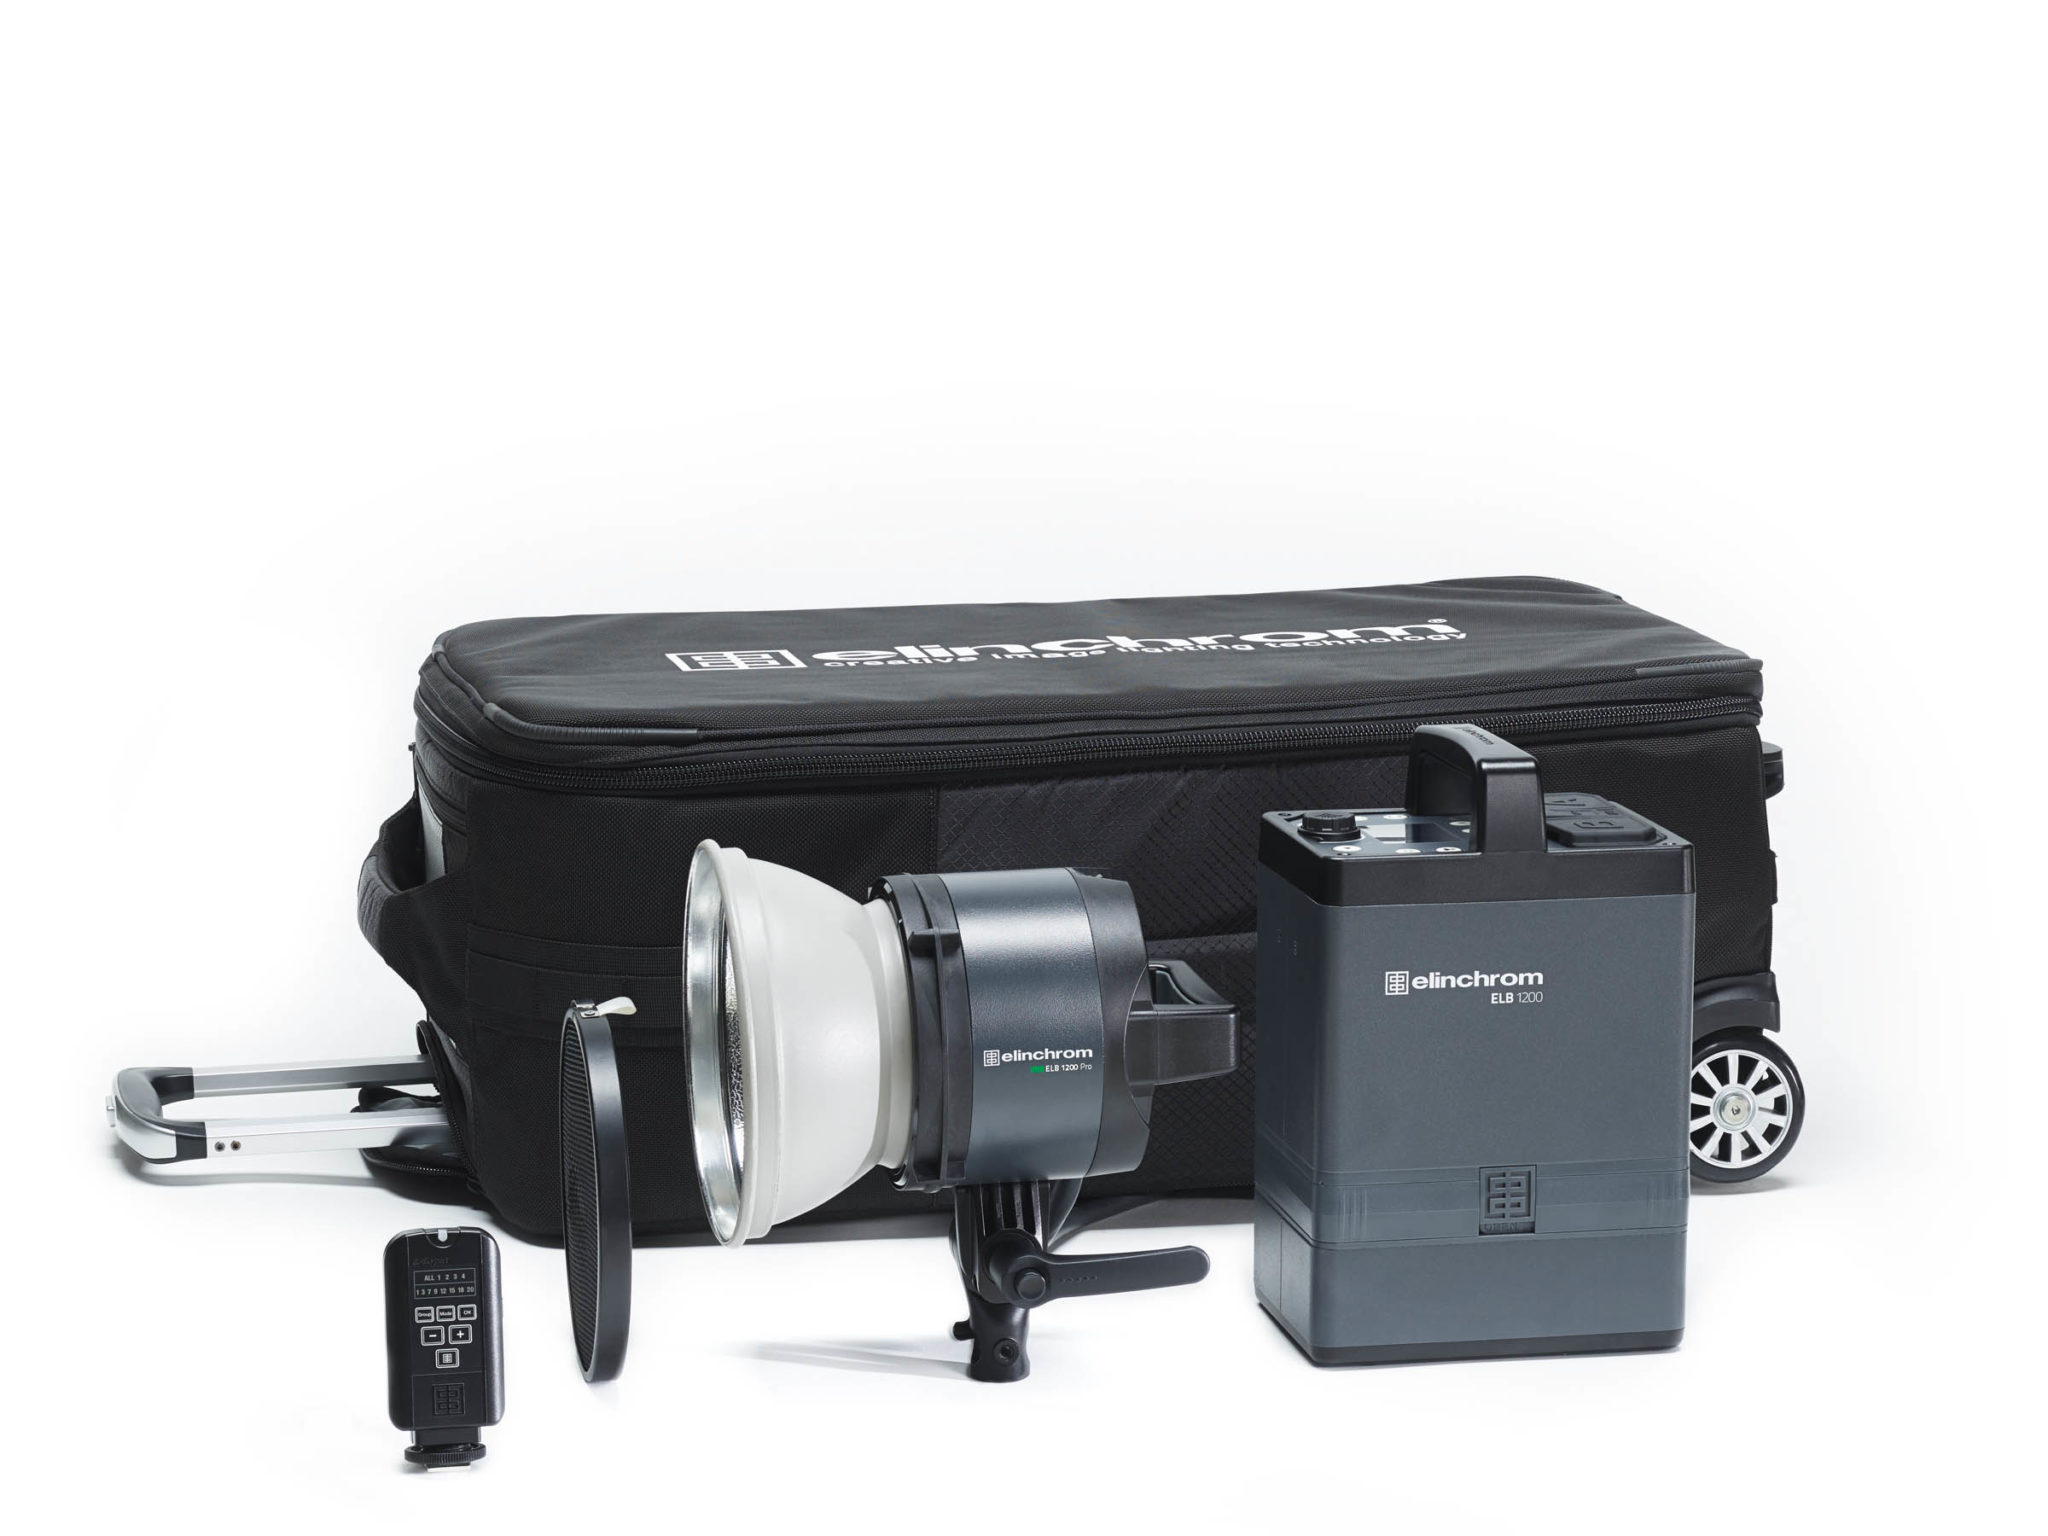 The Elinchrom ELB-1200’s Compact Size Targets On Location Adventure Photographers